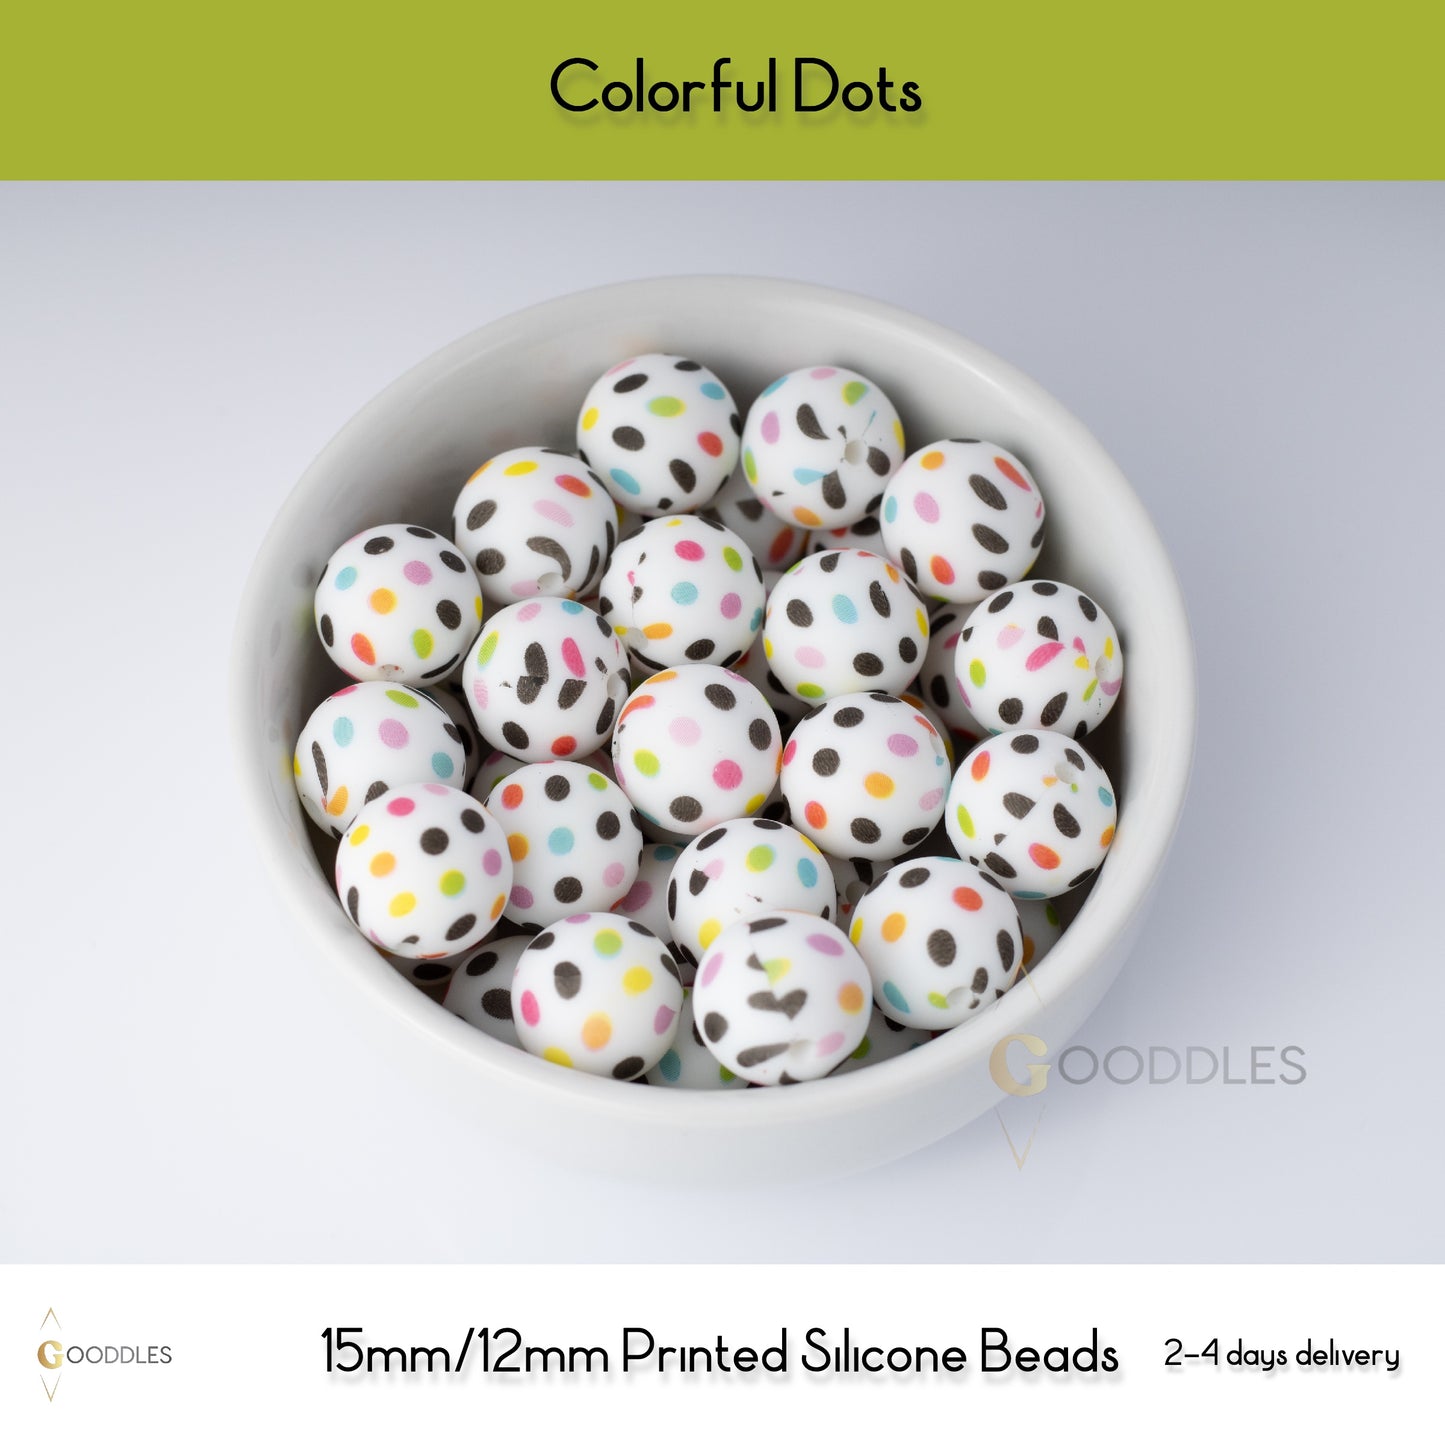 5pcs, Colorful Dots Silicone Beads Printed Round Silicone Beads